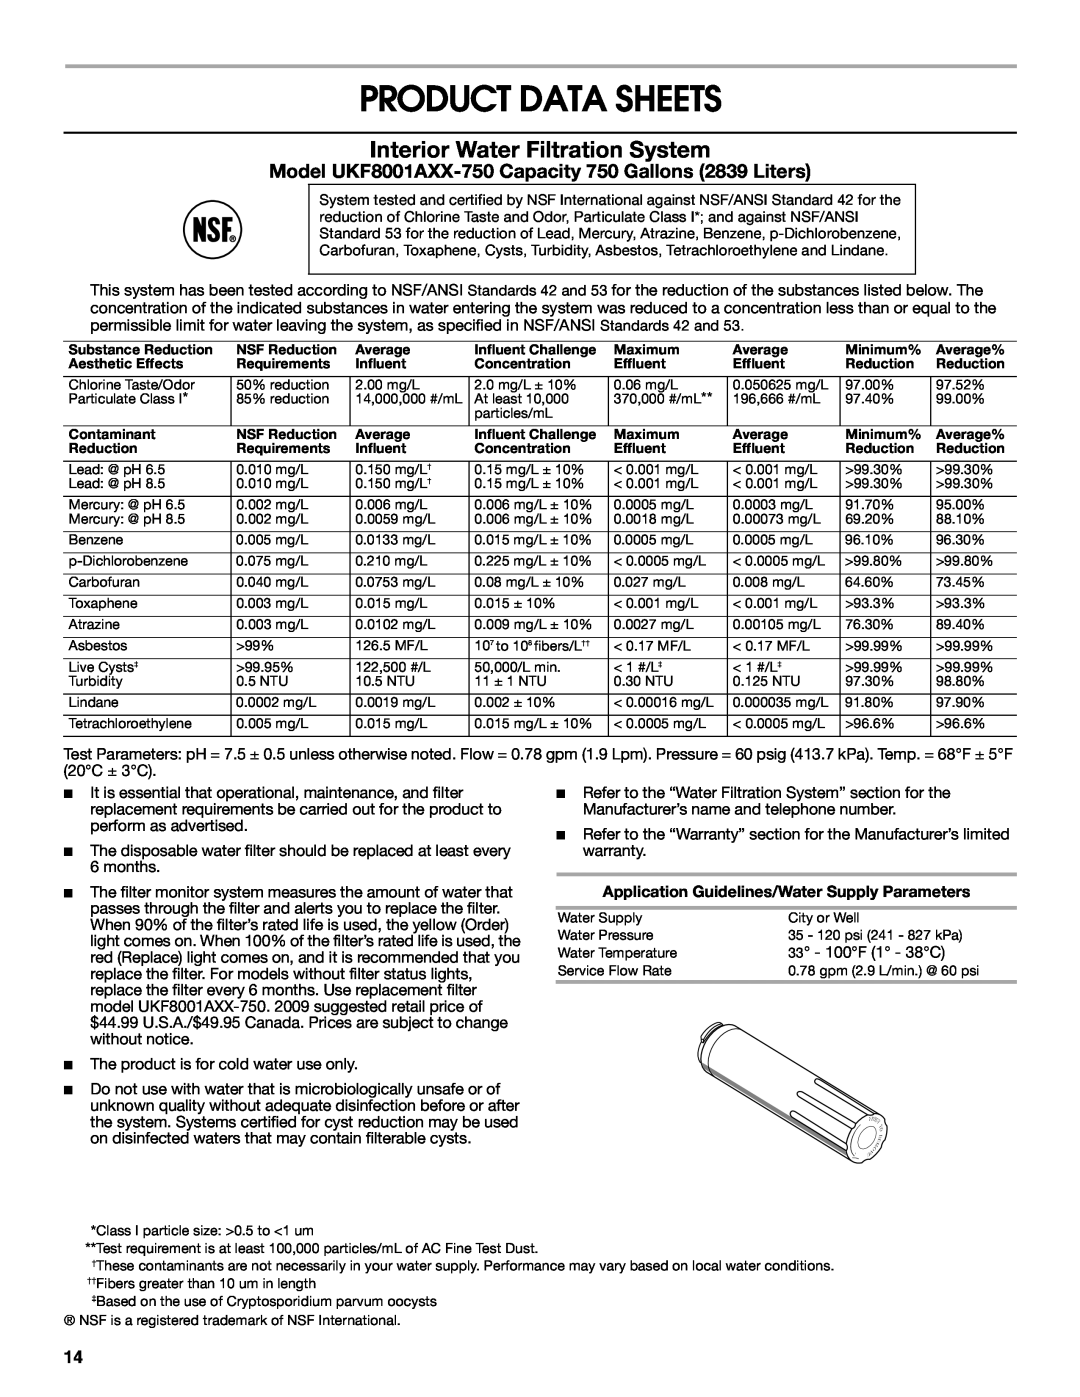 Jenn-Air W10276070A installation instructions Product Data Sheets, Interior Water Filtration System 